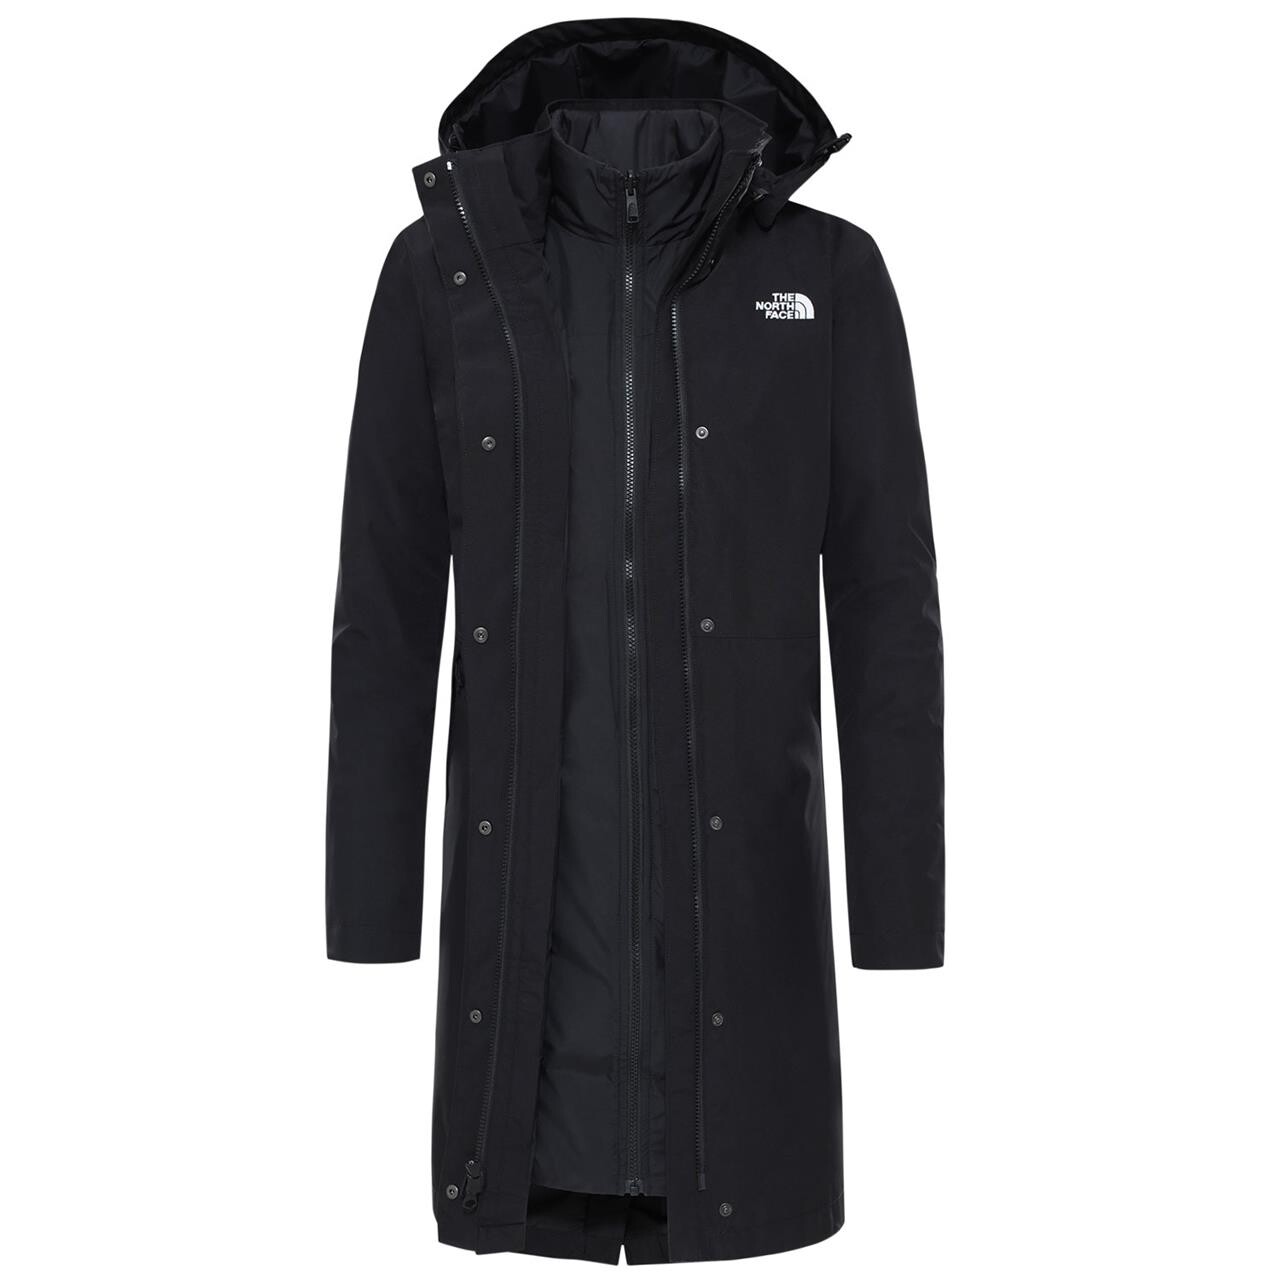 Se The North Face Womens Recycled Suzanne Triclimate Jacket (Sort (TNF BLACK/TNF BLACK) Small) hos Friluftsland.dk